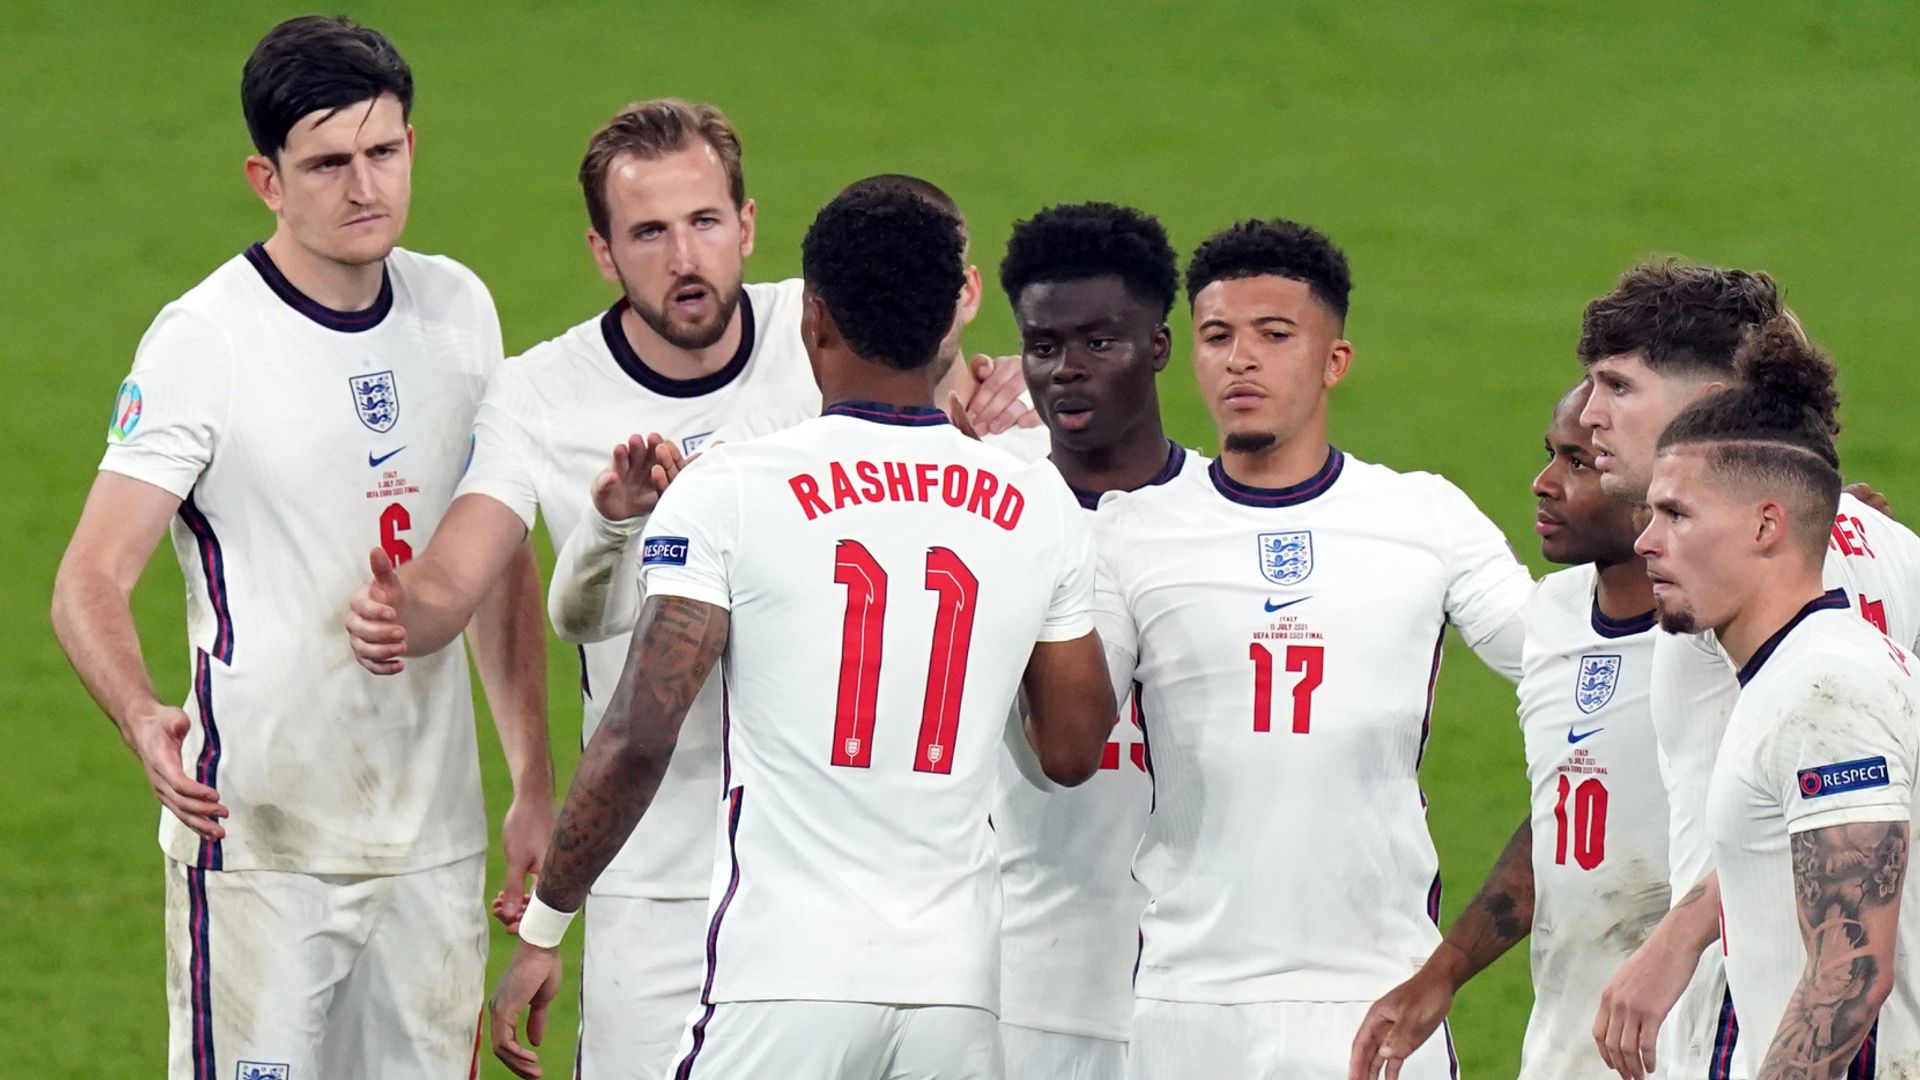 FA, PM condemn racist abuse suffered by England players